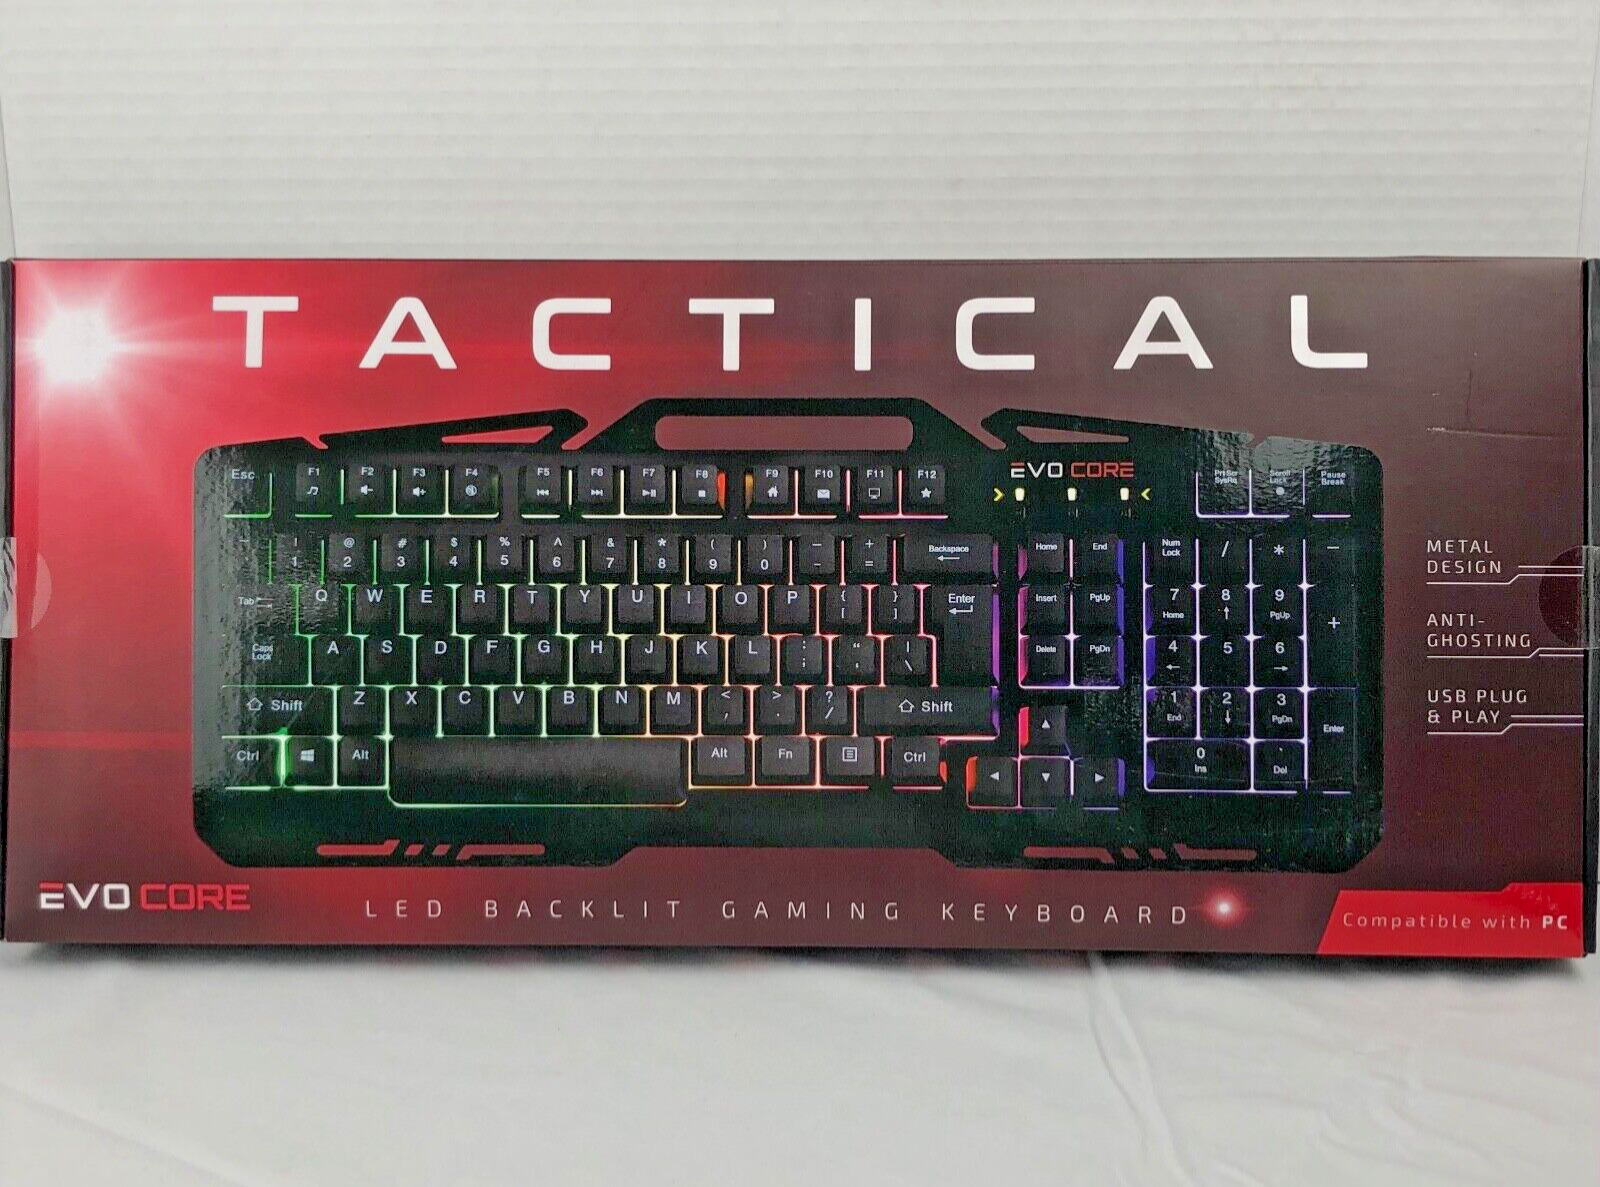 Tactical RGB LED Backlight Gaming Keyboard by Evo Core NEW IN BOX